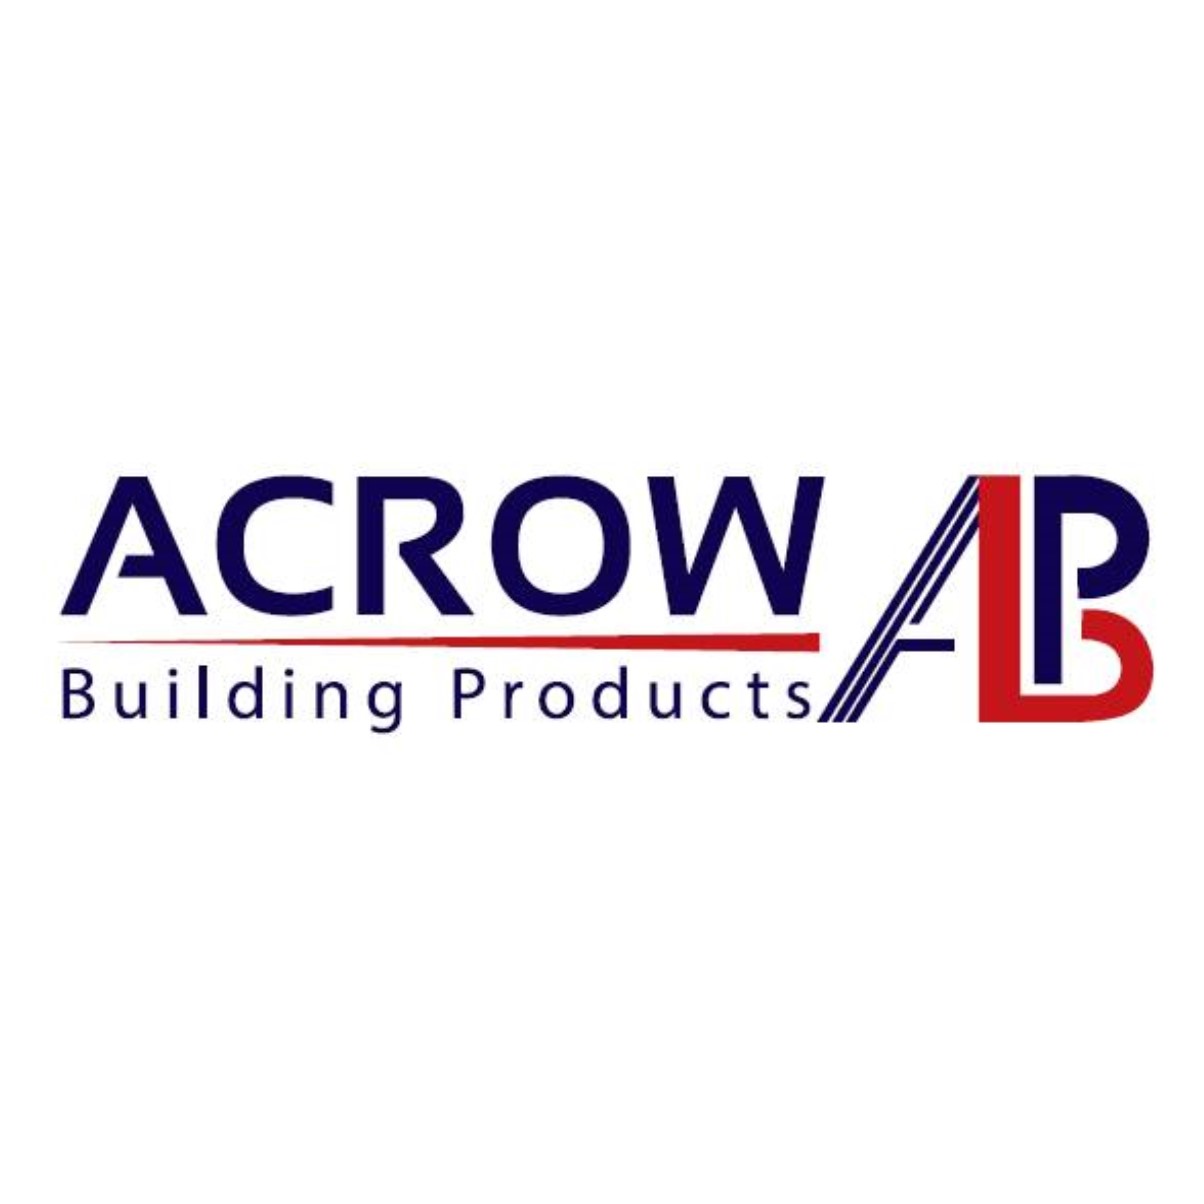 ACROW Building Products ABP